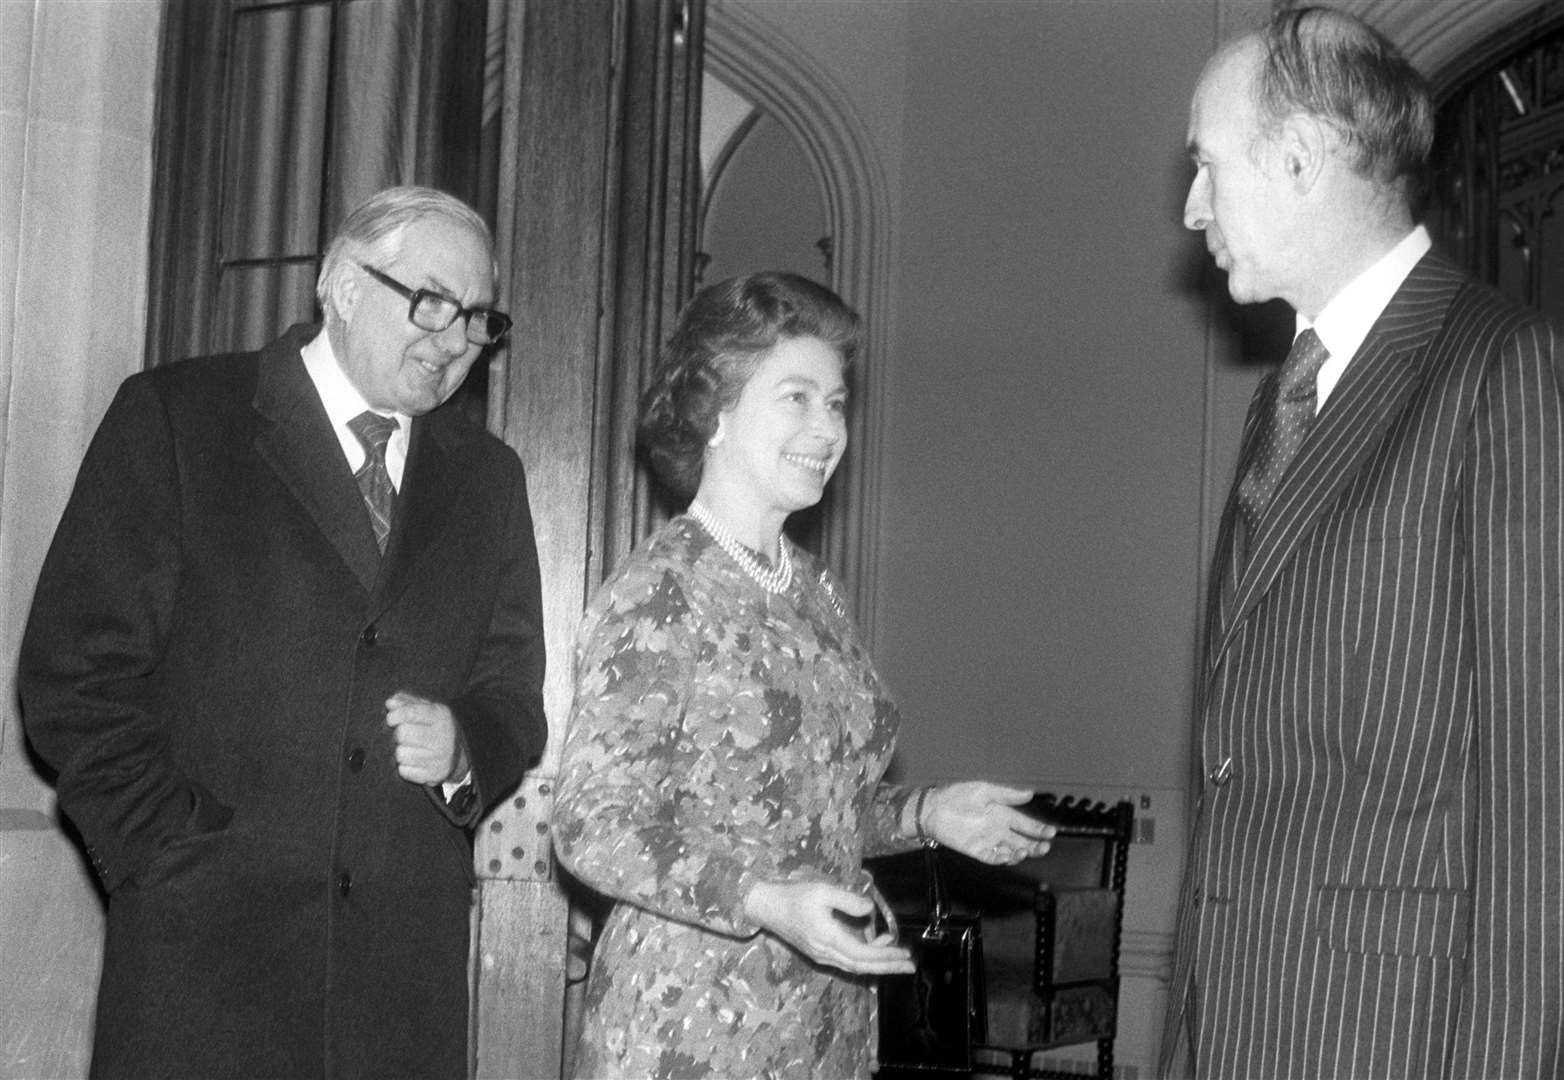 The Queen welcoming James Callaghan and French president Valery Giscard d’Estaing for a lunch at Windsor Castle in 1977 (PA)